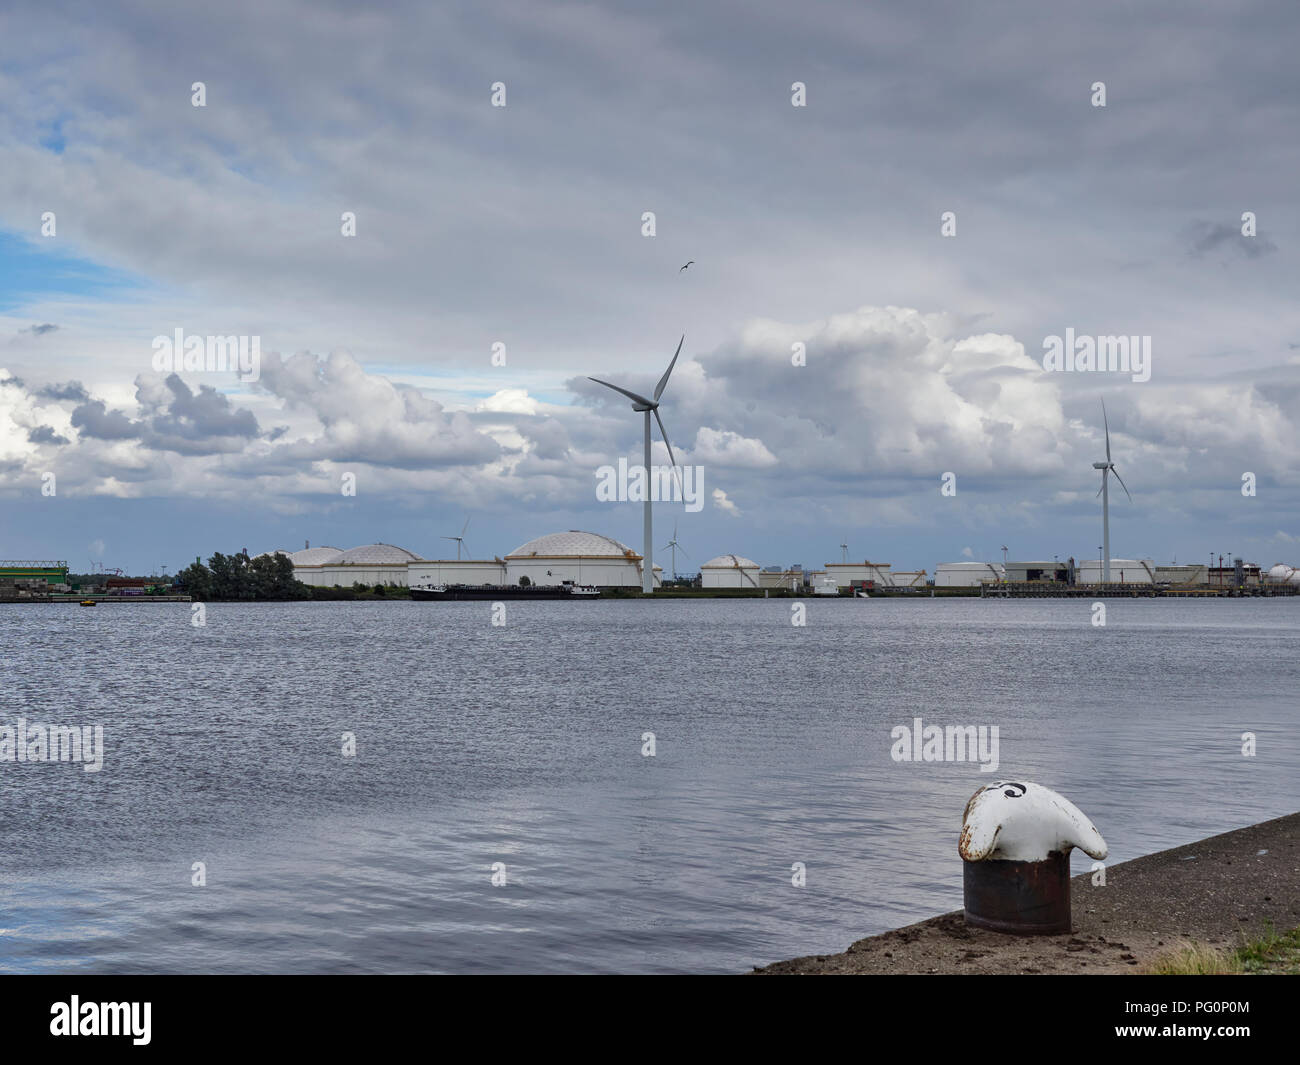 Looking across a part of the North Sea Canal towards the large Liquid Storage Tanks and Wind Turbines in Den Haag in Amsterdam, Holland. Stock Photo